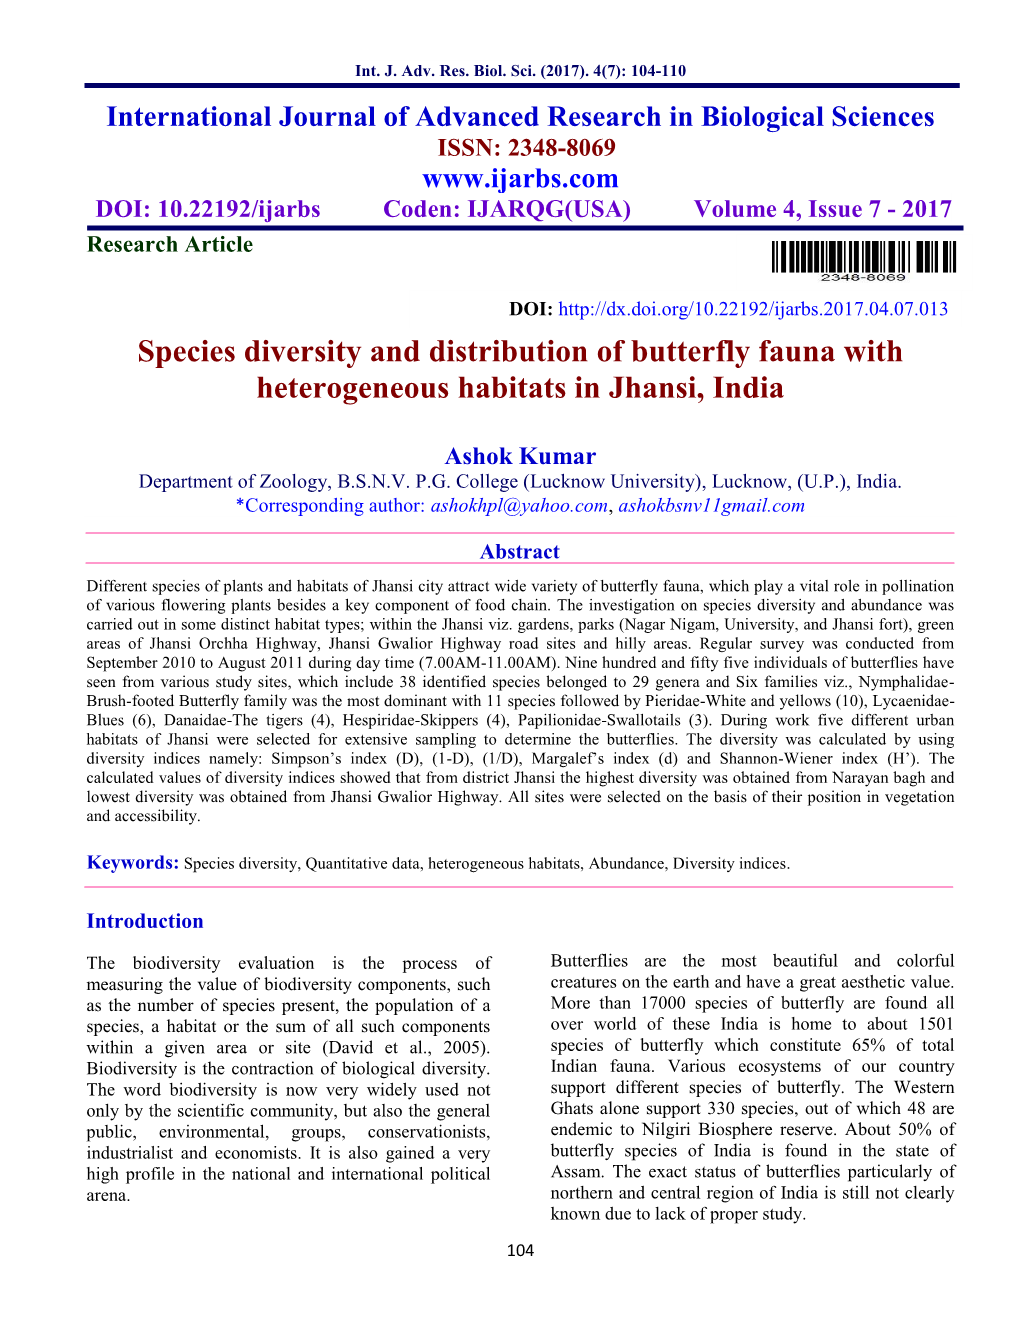 Species Diversity and Distribution of Butterfly Fauna with Heterogeneous Habitats in Jhansi, India